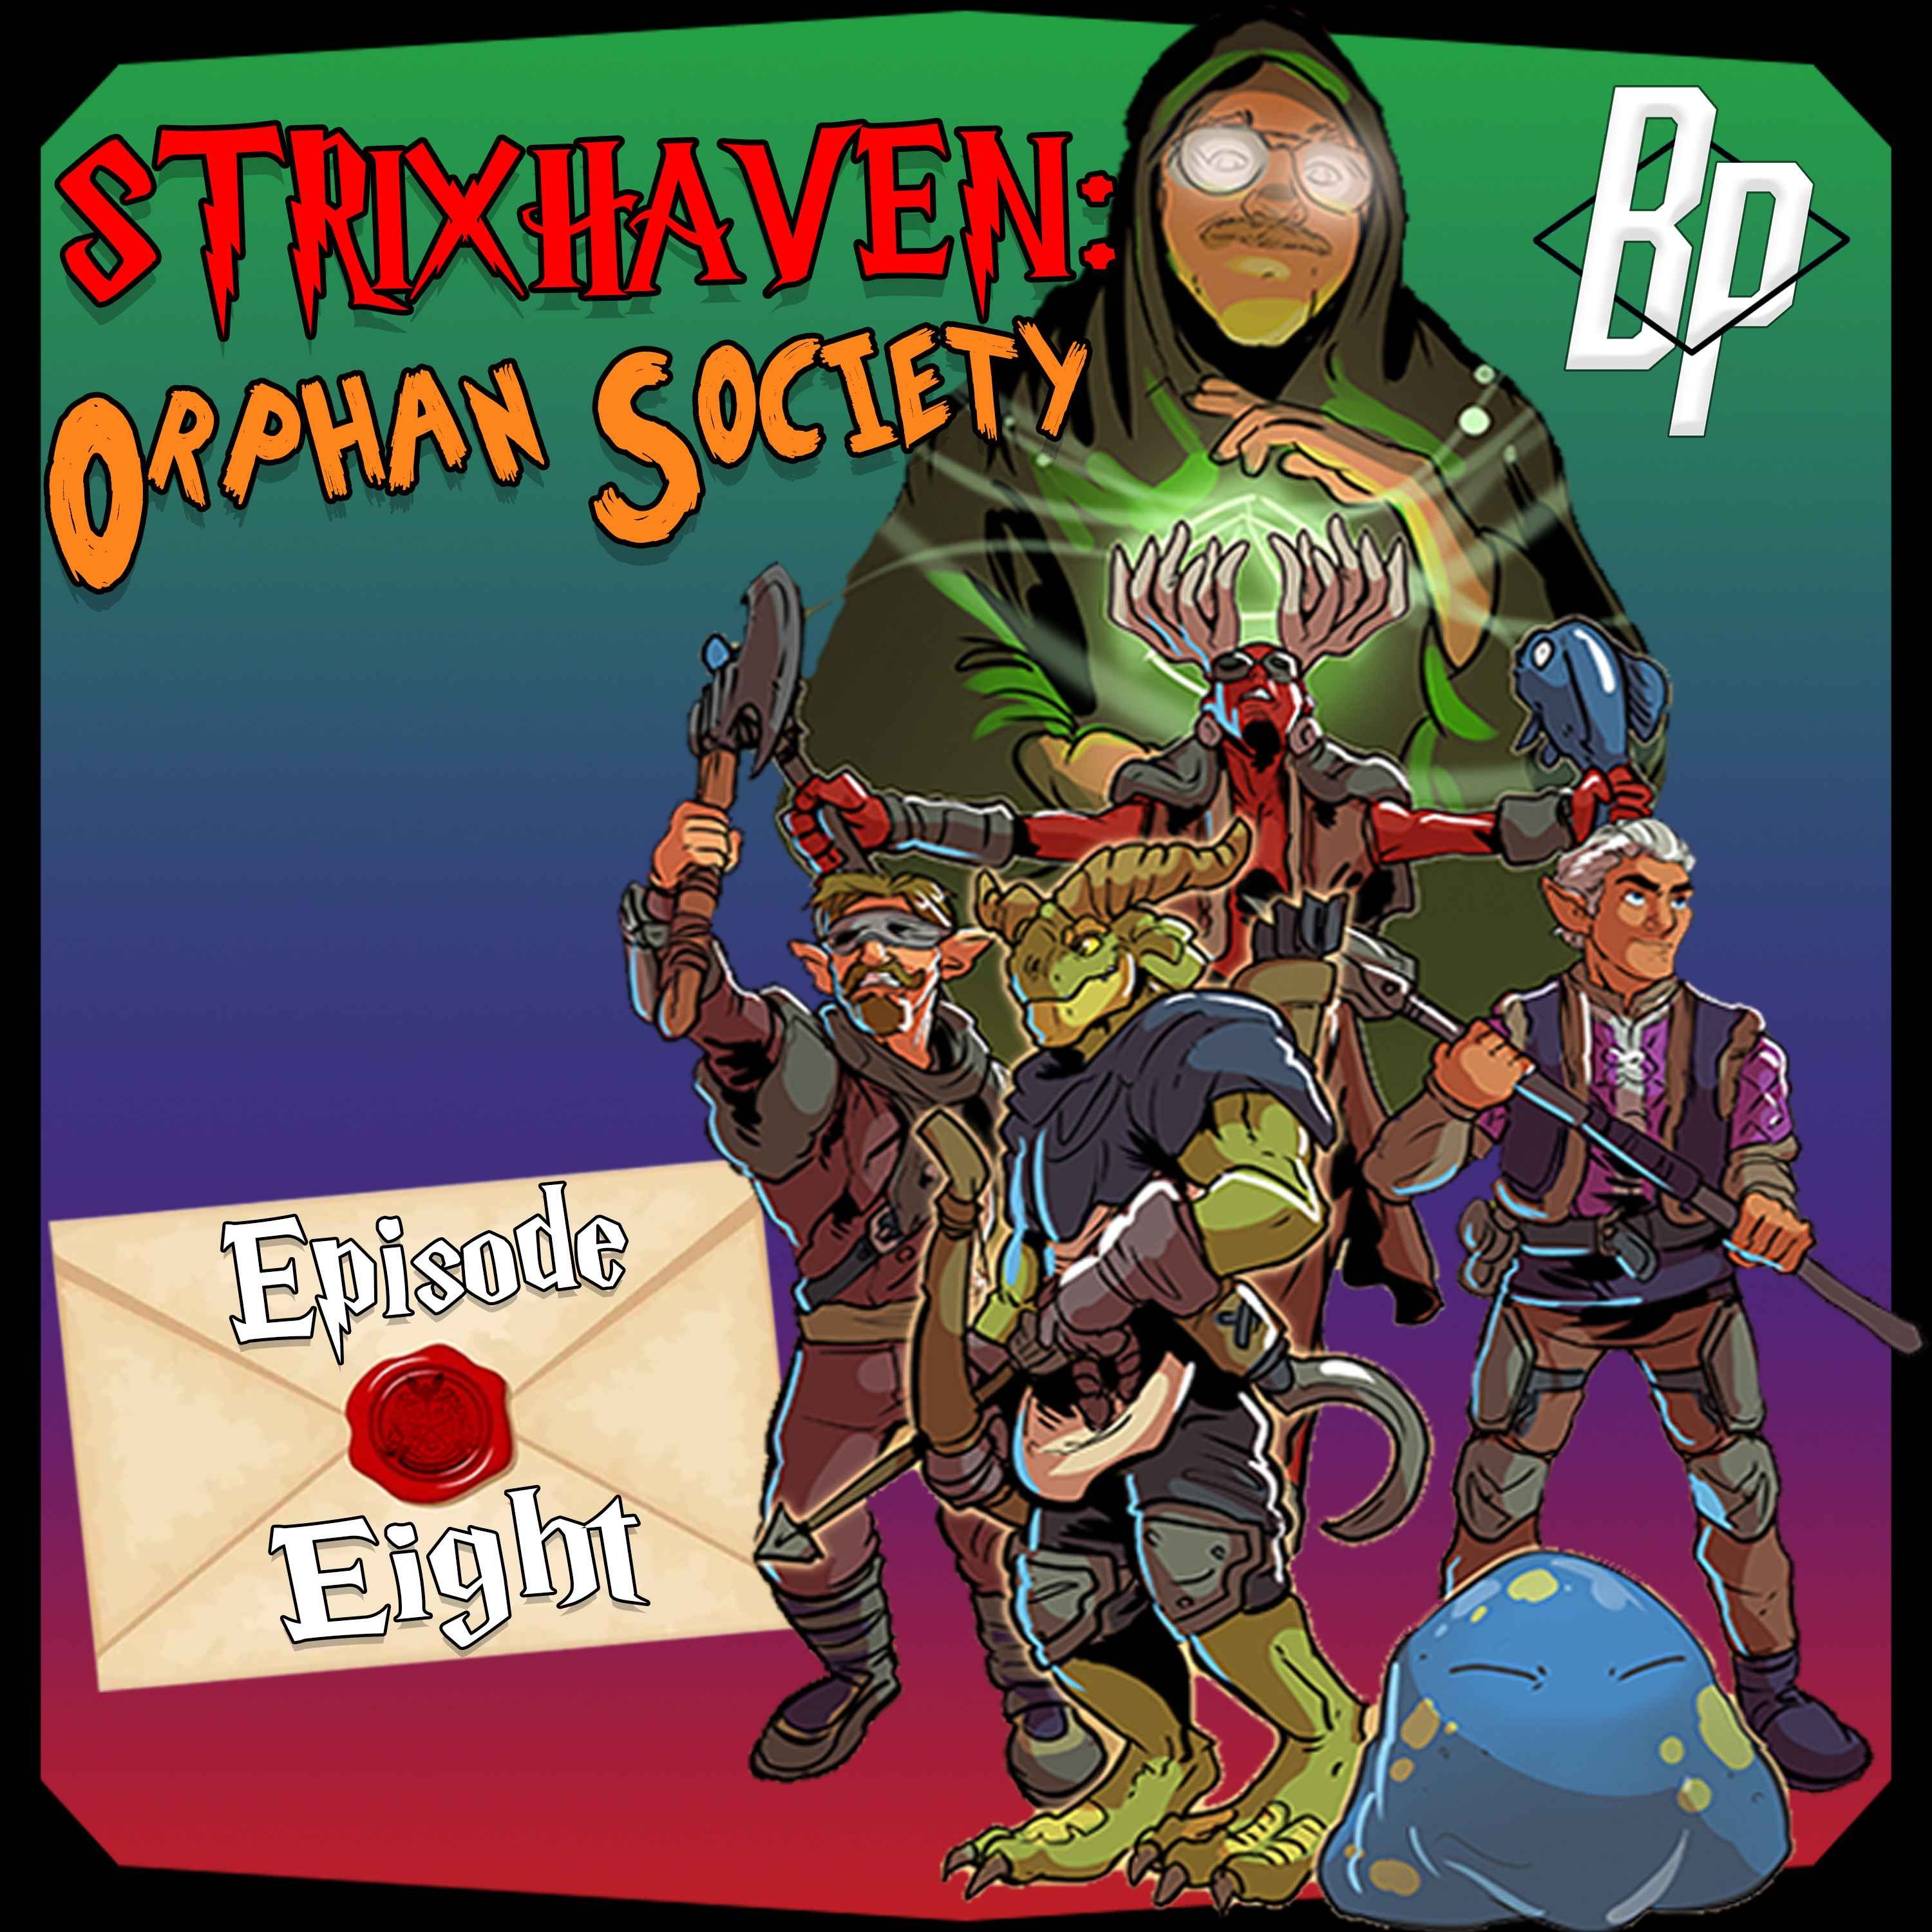 The Lycan, The Driad, in the Wardrobe | Episode 8 | Strixhaven: Orphan Society